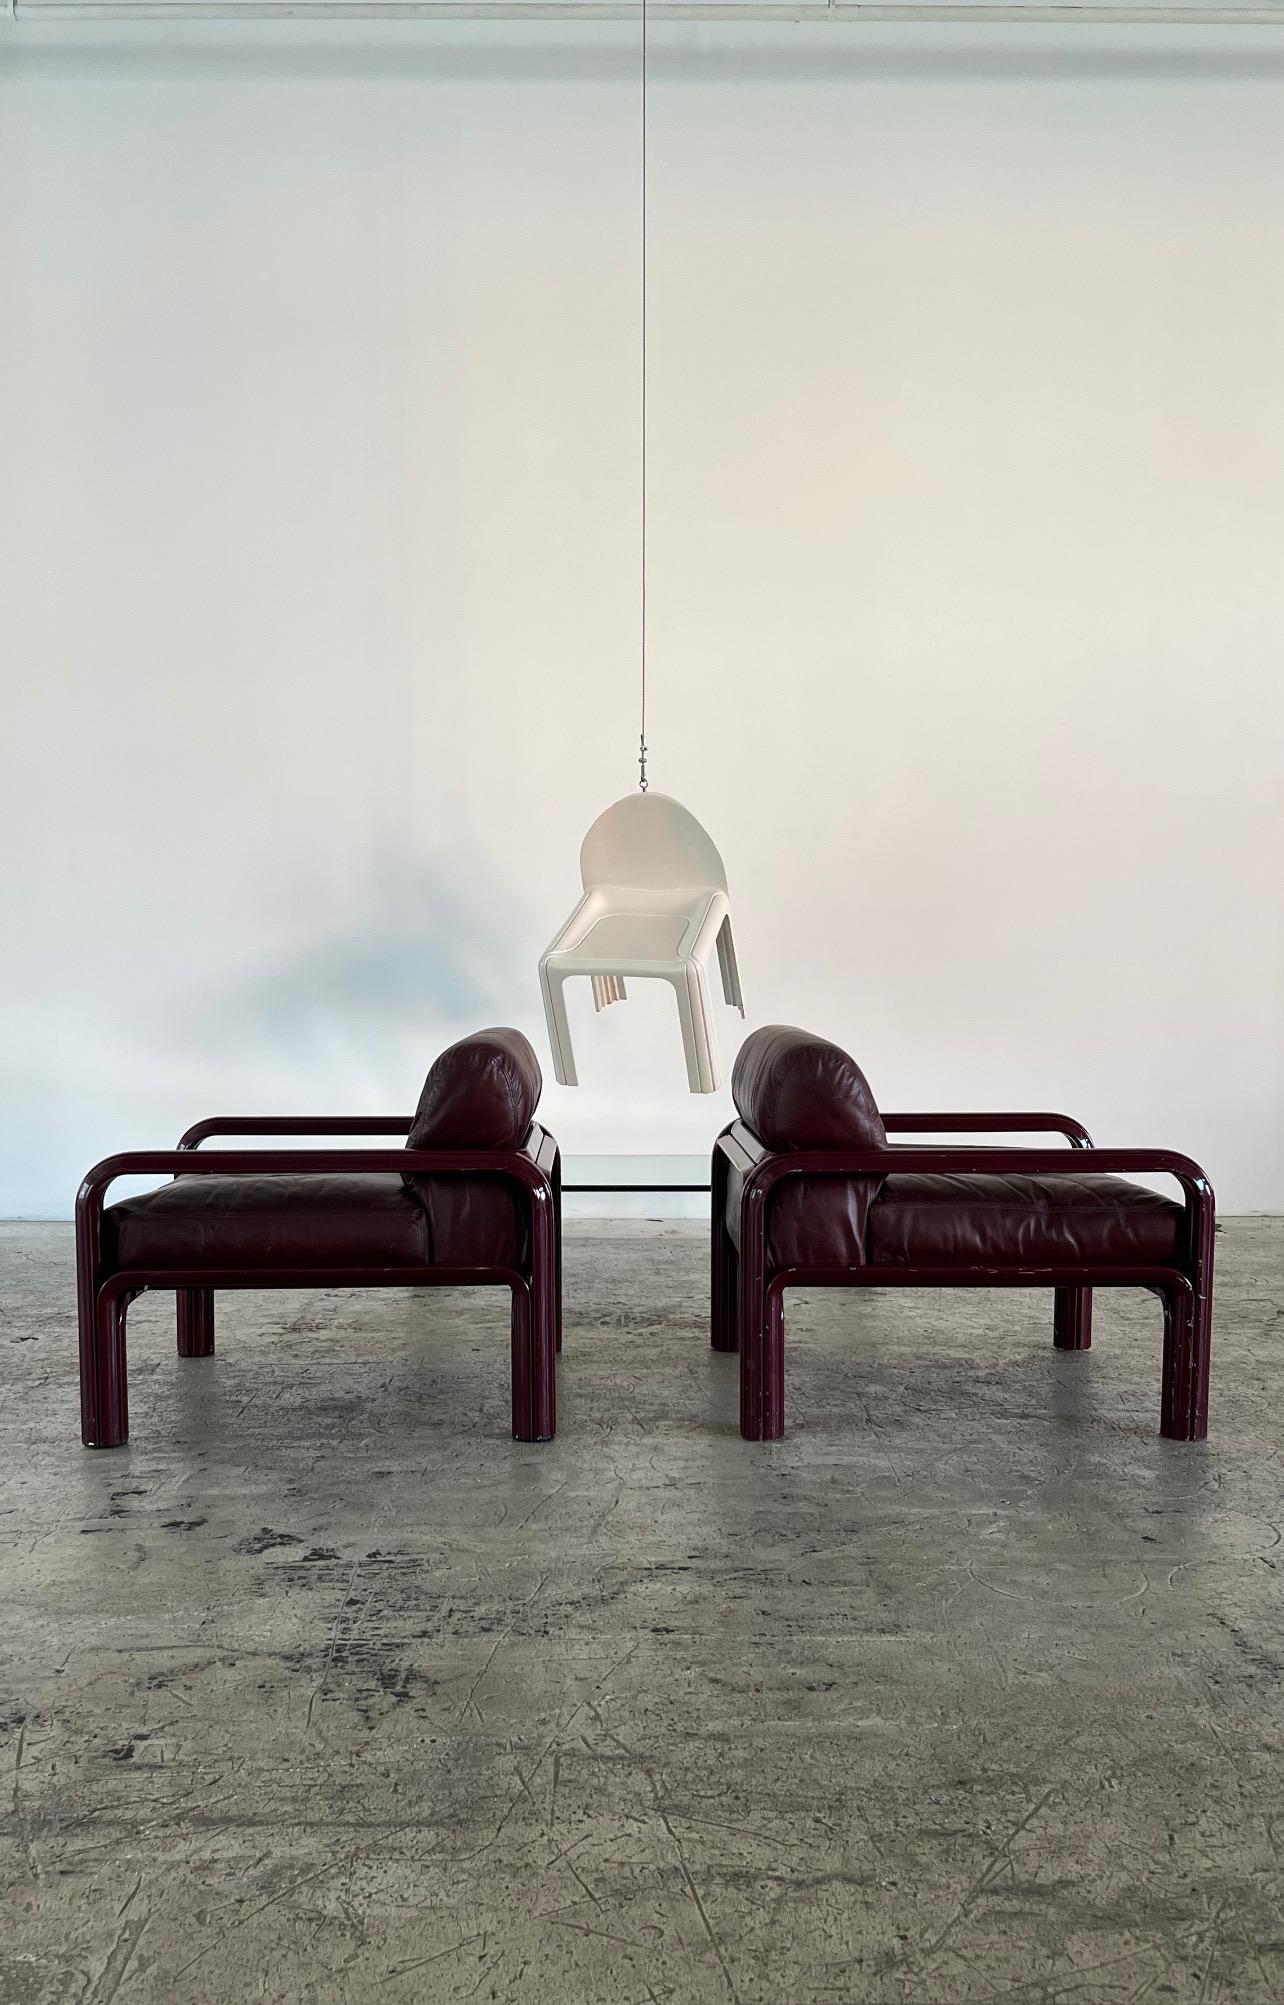 This arm chair was designed by Gae Aulenti for Knoll International in 1974 as part of the Aulenti Collection with matching sofas and coffee tables. This chair is made of a maroon enameled channel metal body and the original maroon leather